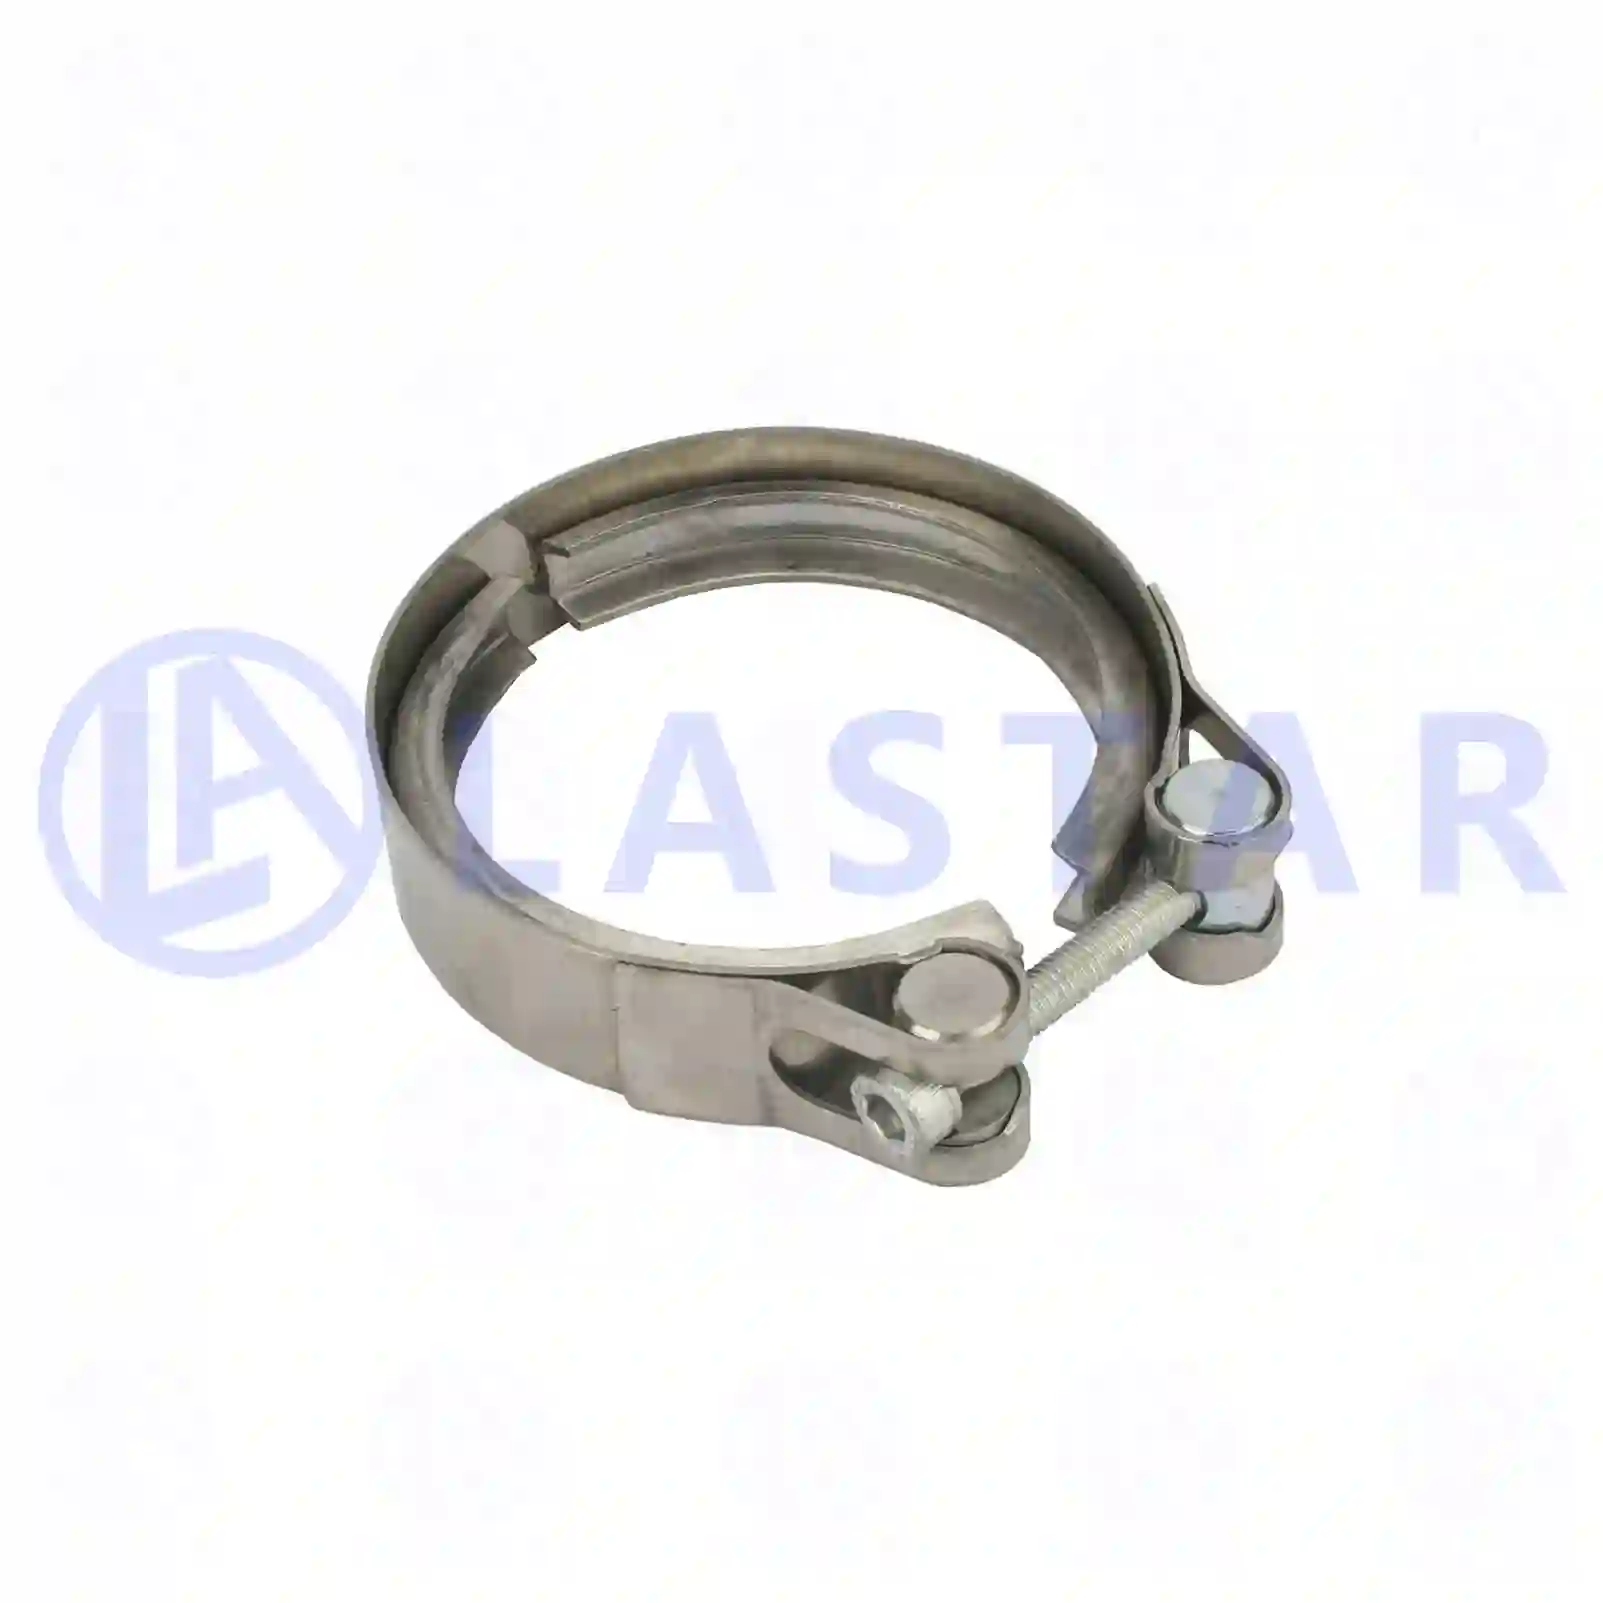 Clamp, 77709914, 1371085, 1392944, 1439822, ZG00324-0008 ||  77709914 Lastar Spare Part | Truck Spare Parts, Auotomotive Spare Parts Clamp, 77709914, 1371085, 1392944, 1439822, ZG00324-0008 ||  77709914 Lastar Spare Part | Truck Spare Parts, Auotomotive Spare Parts